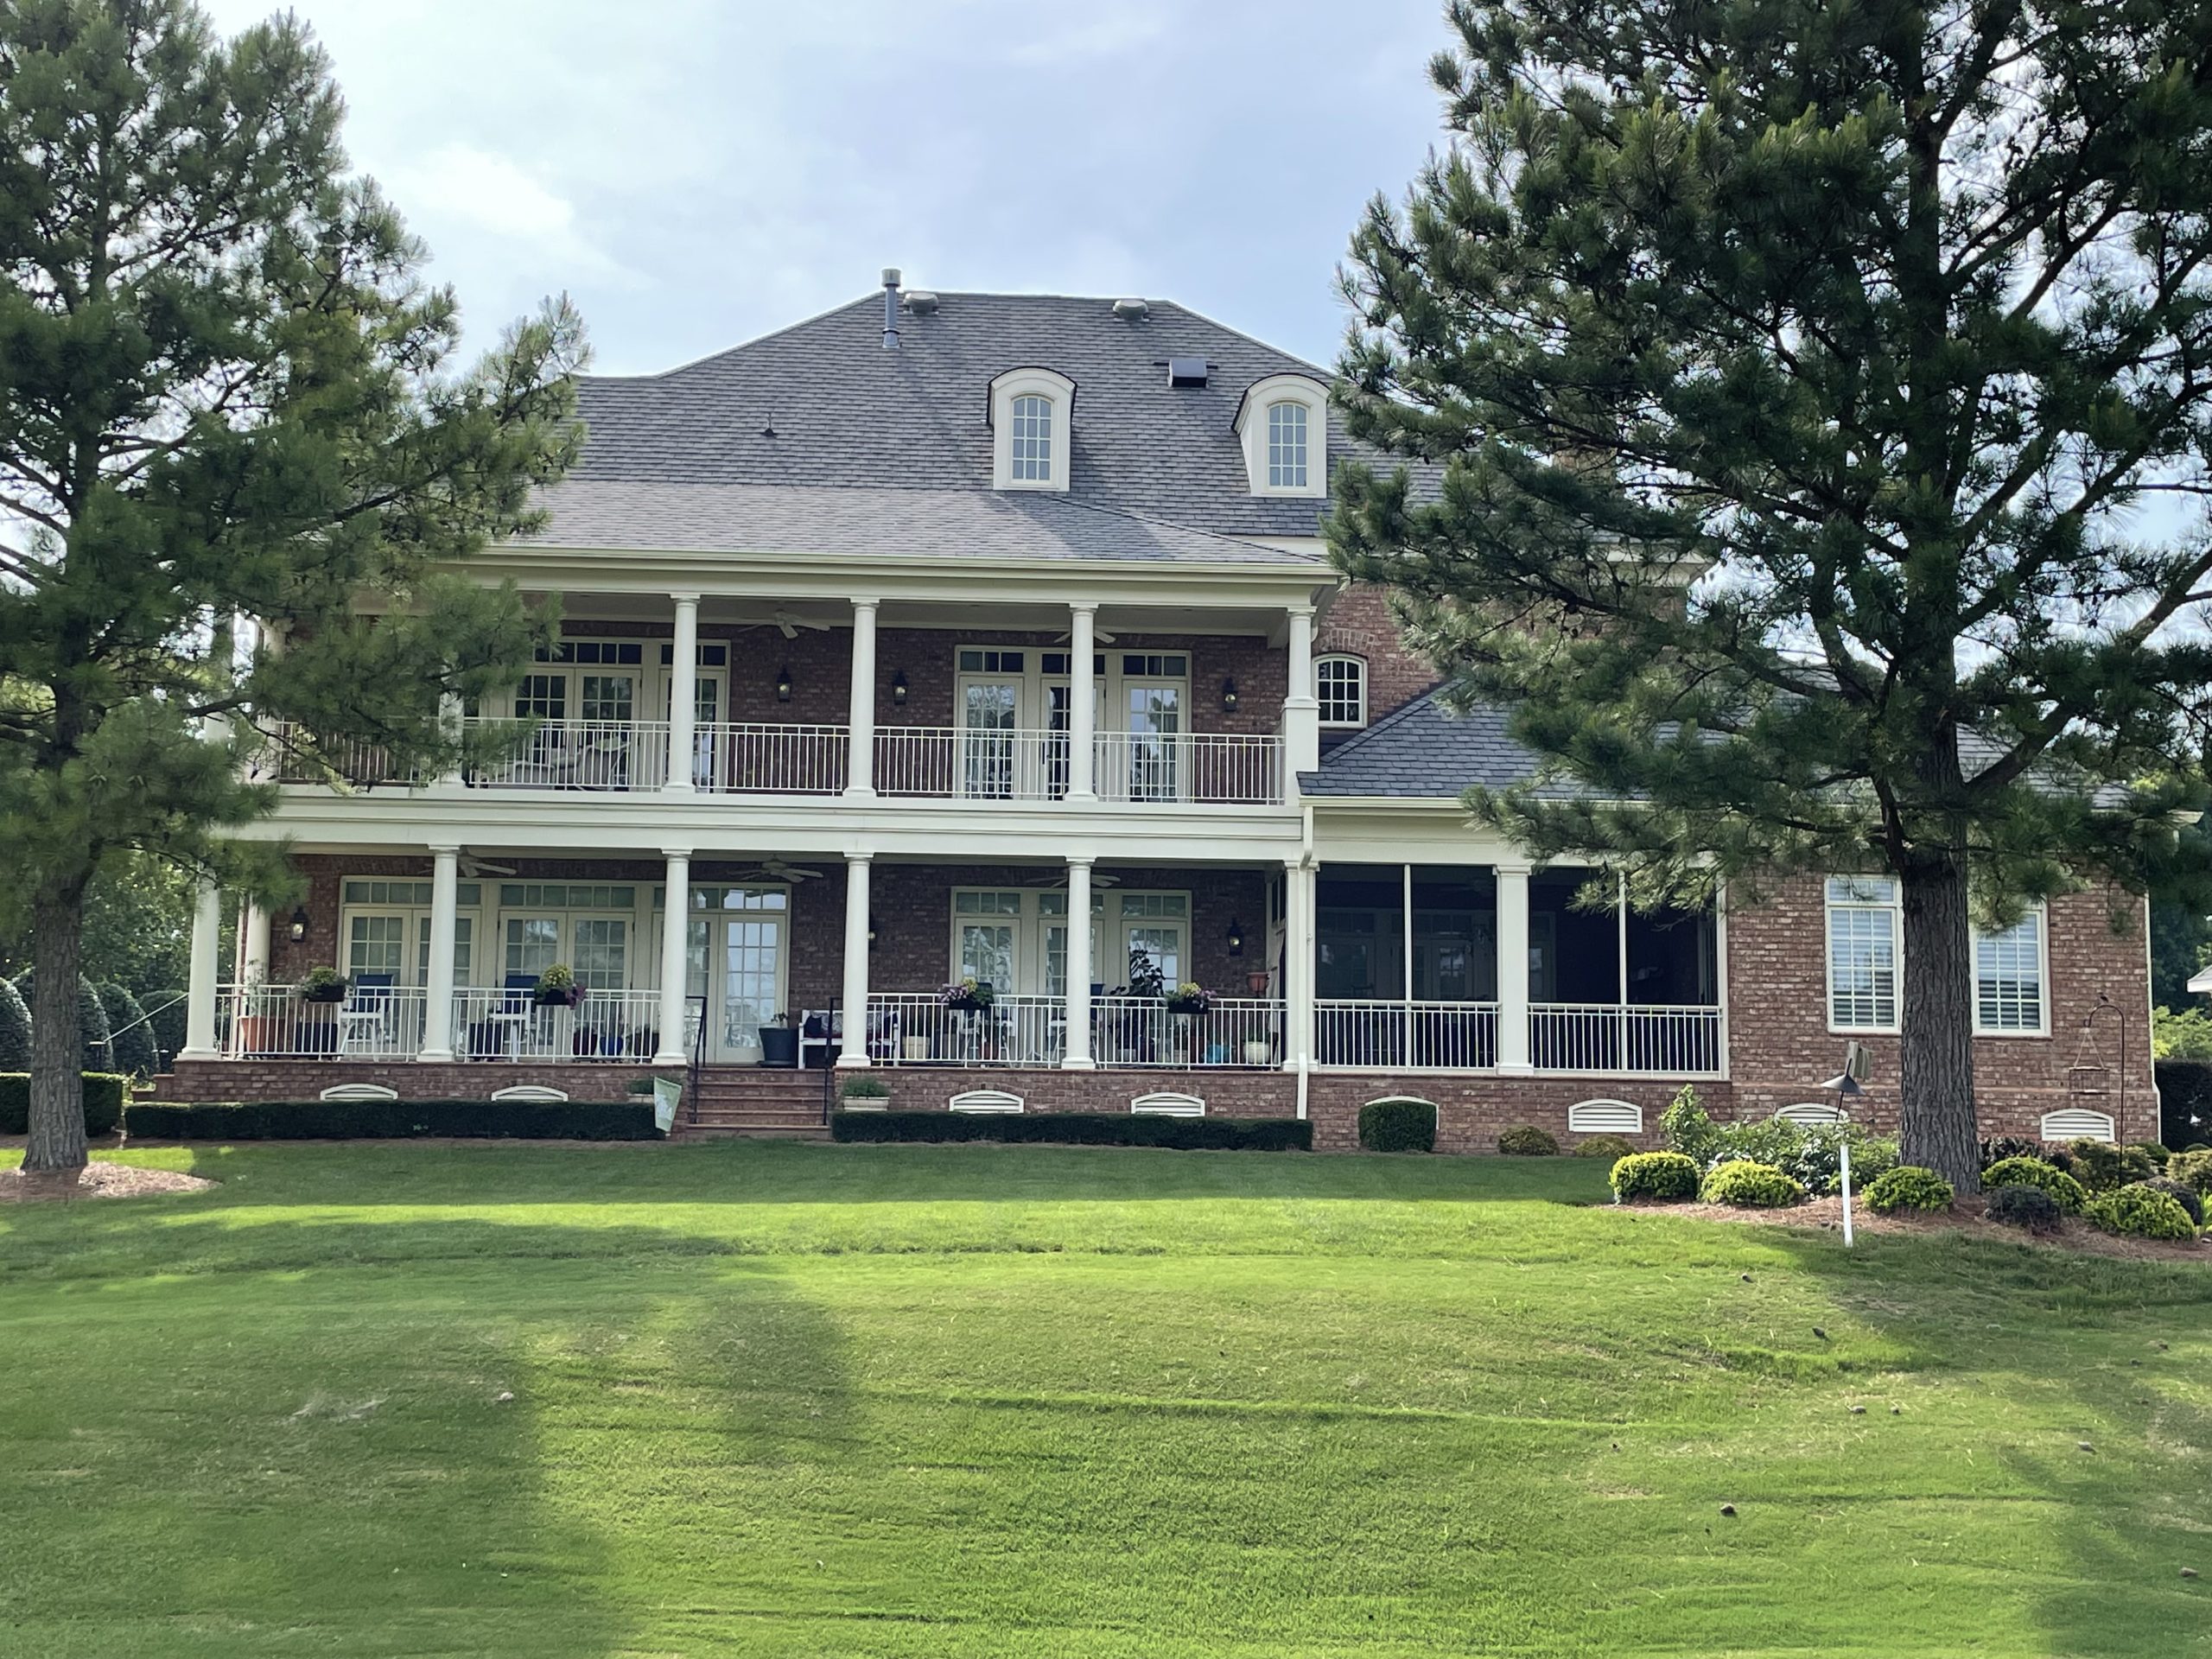 back of a large brick house with porch and balcony